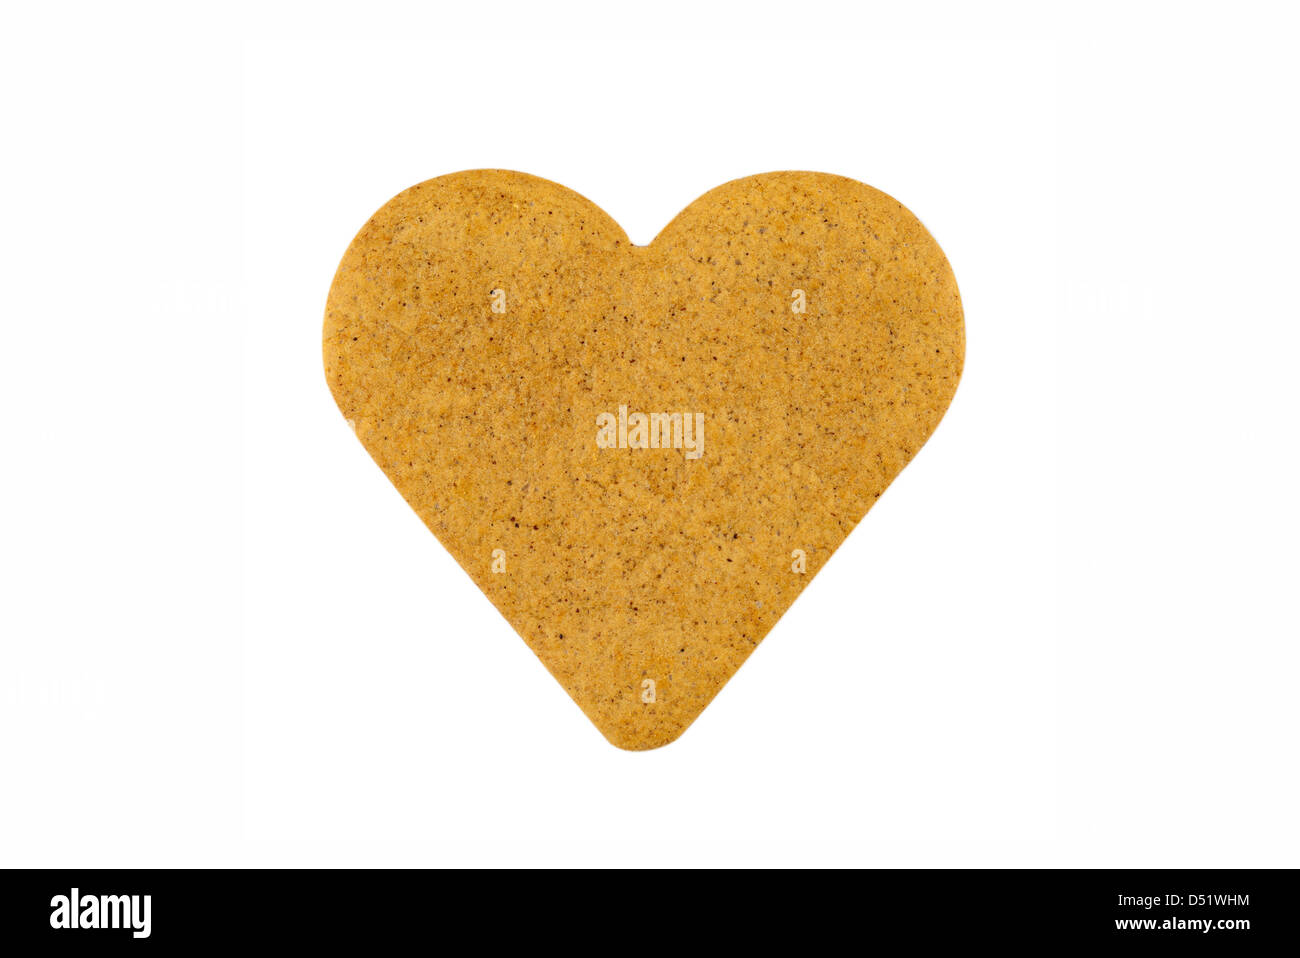 Heart shape gingerbread cookie isolated on white with clipping path. Stock Photo